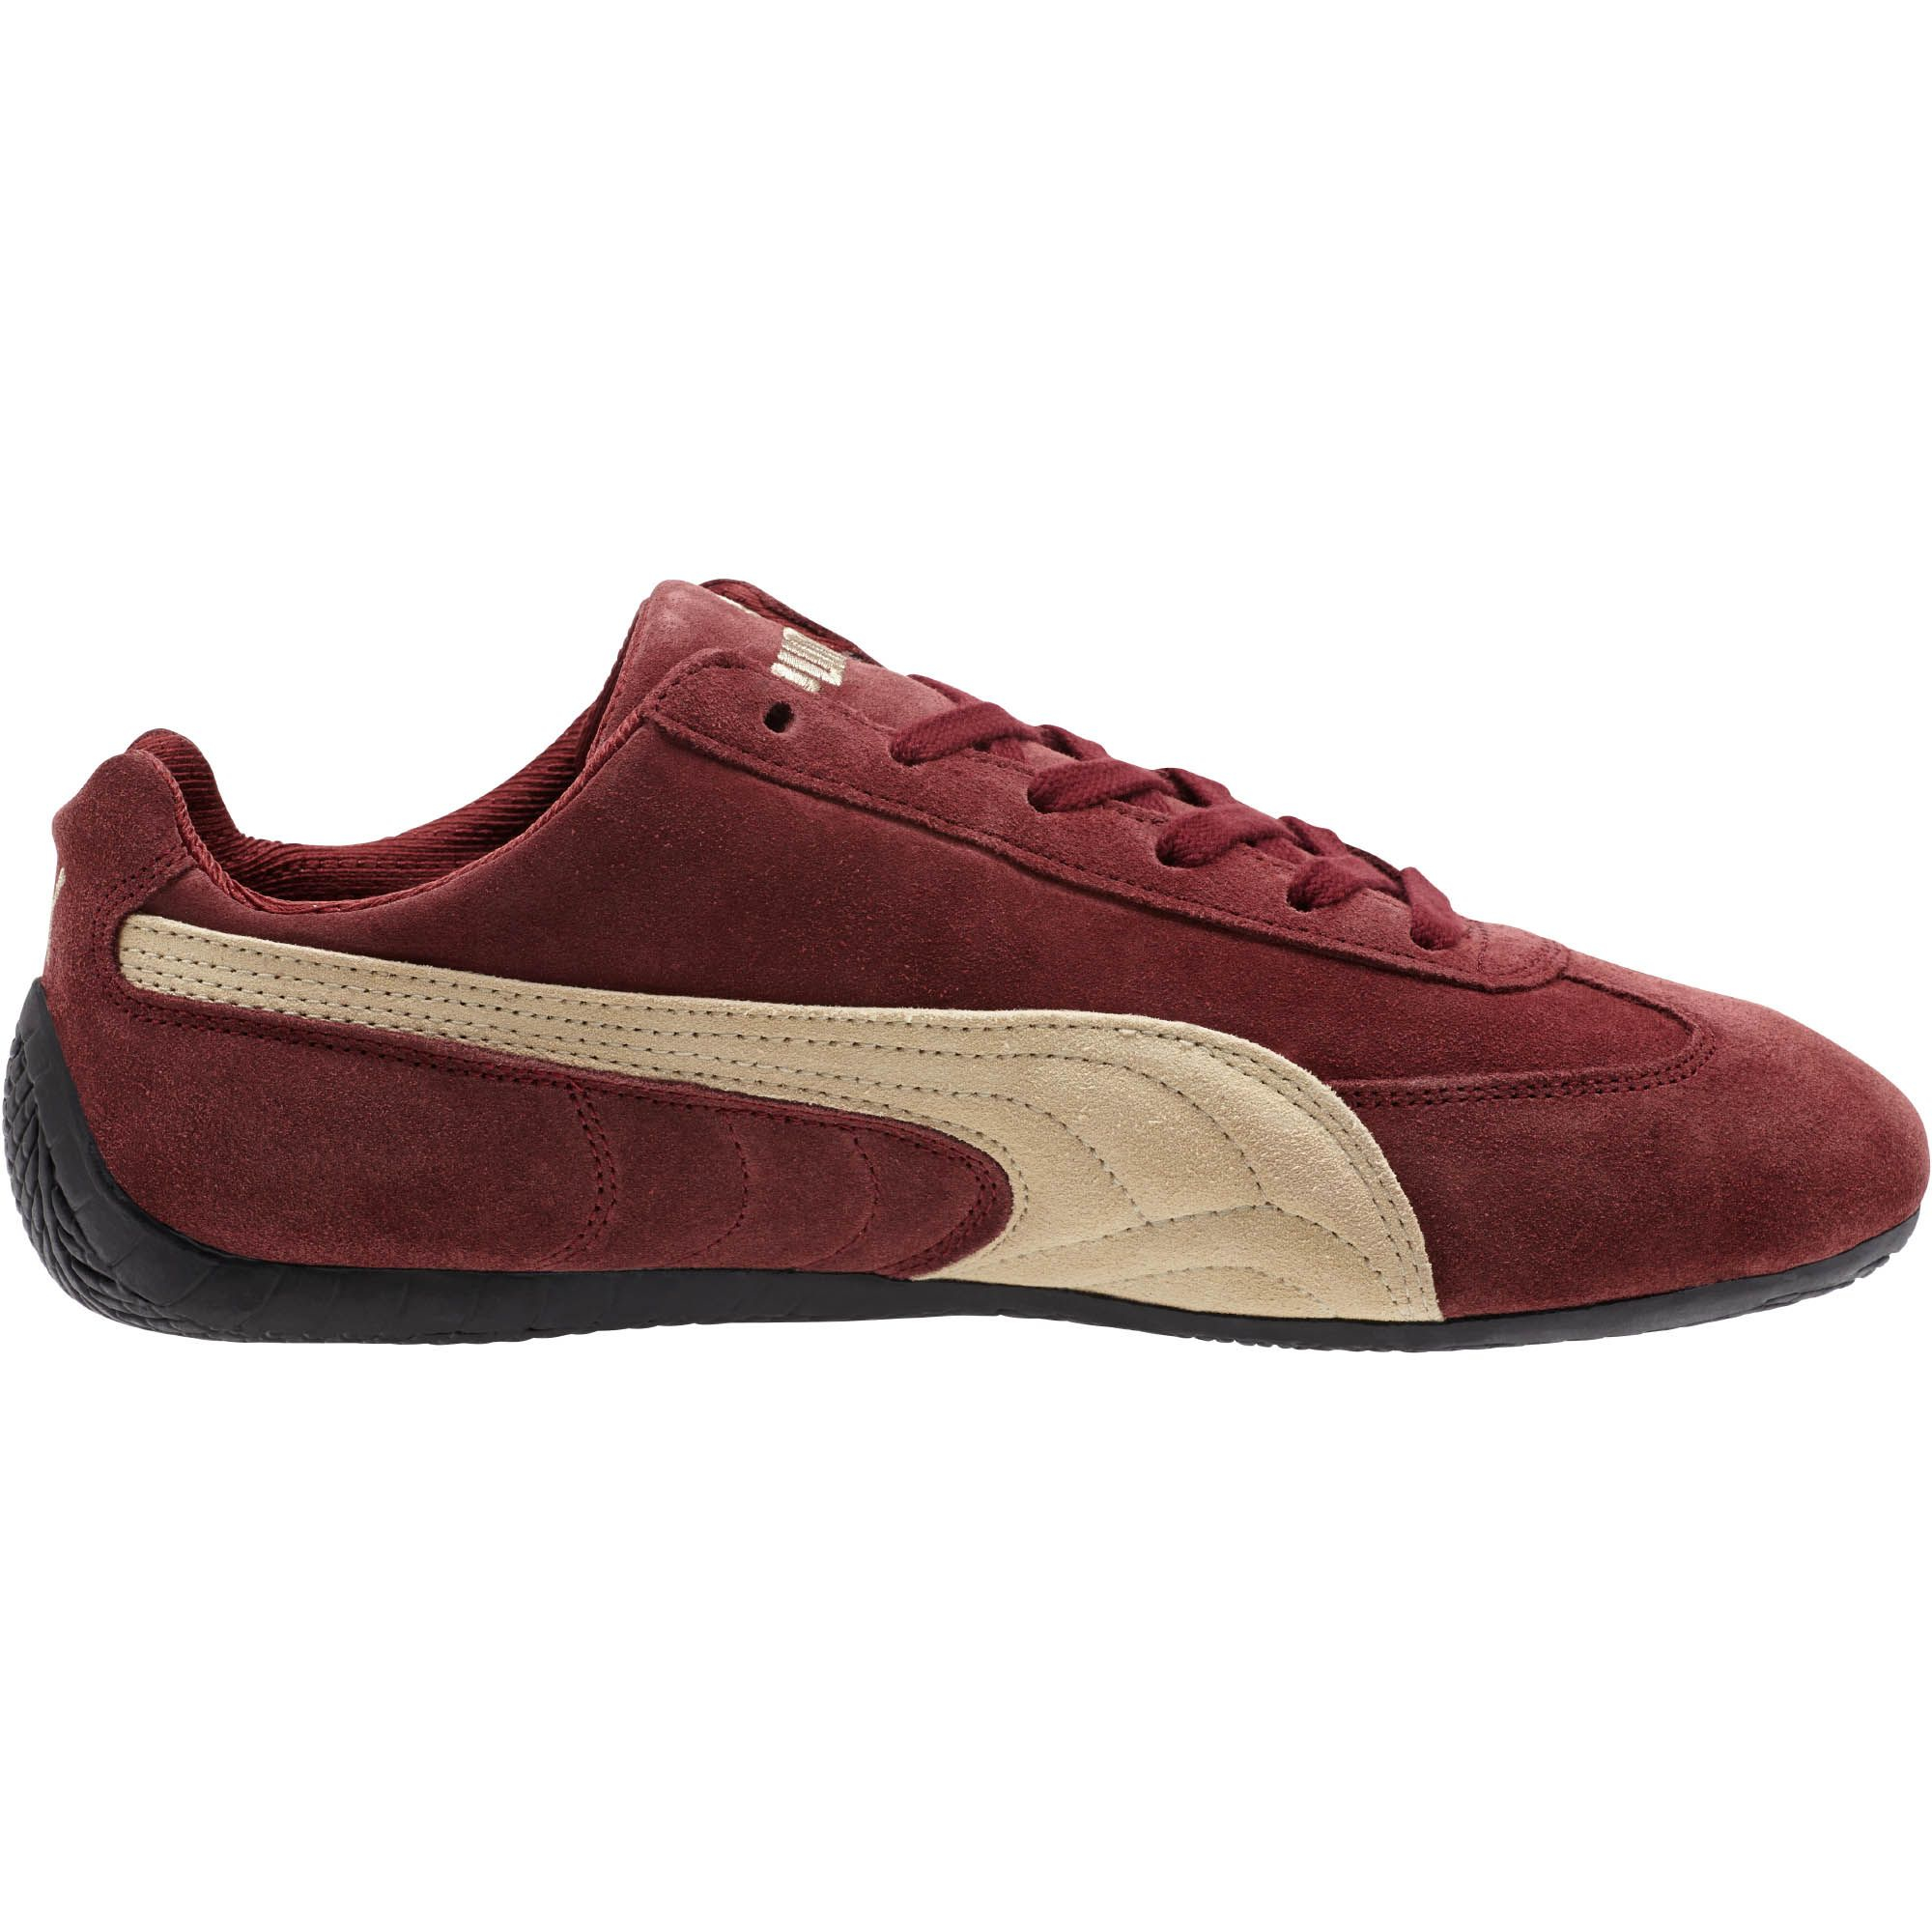 Lyst - Puma Speed Cat Shoes in Natural for Men